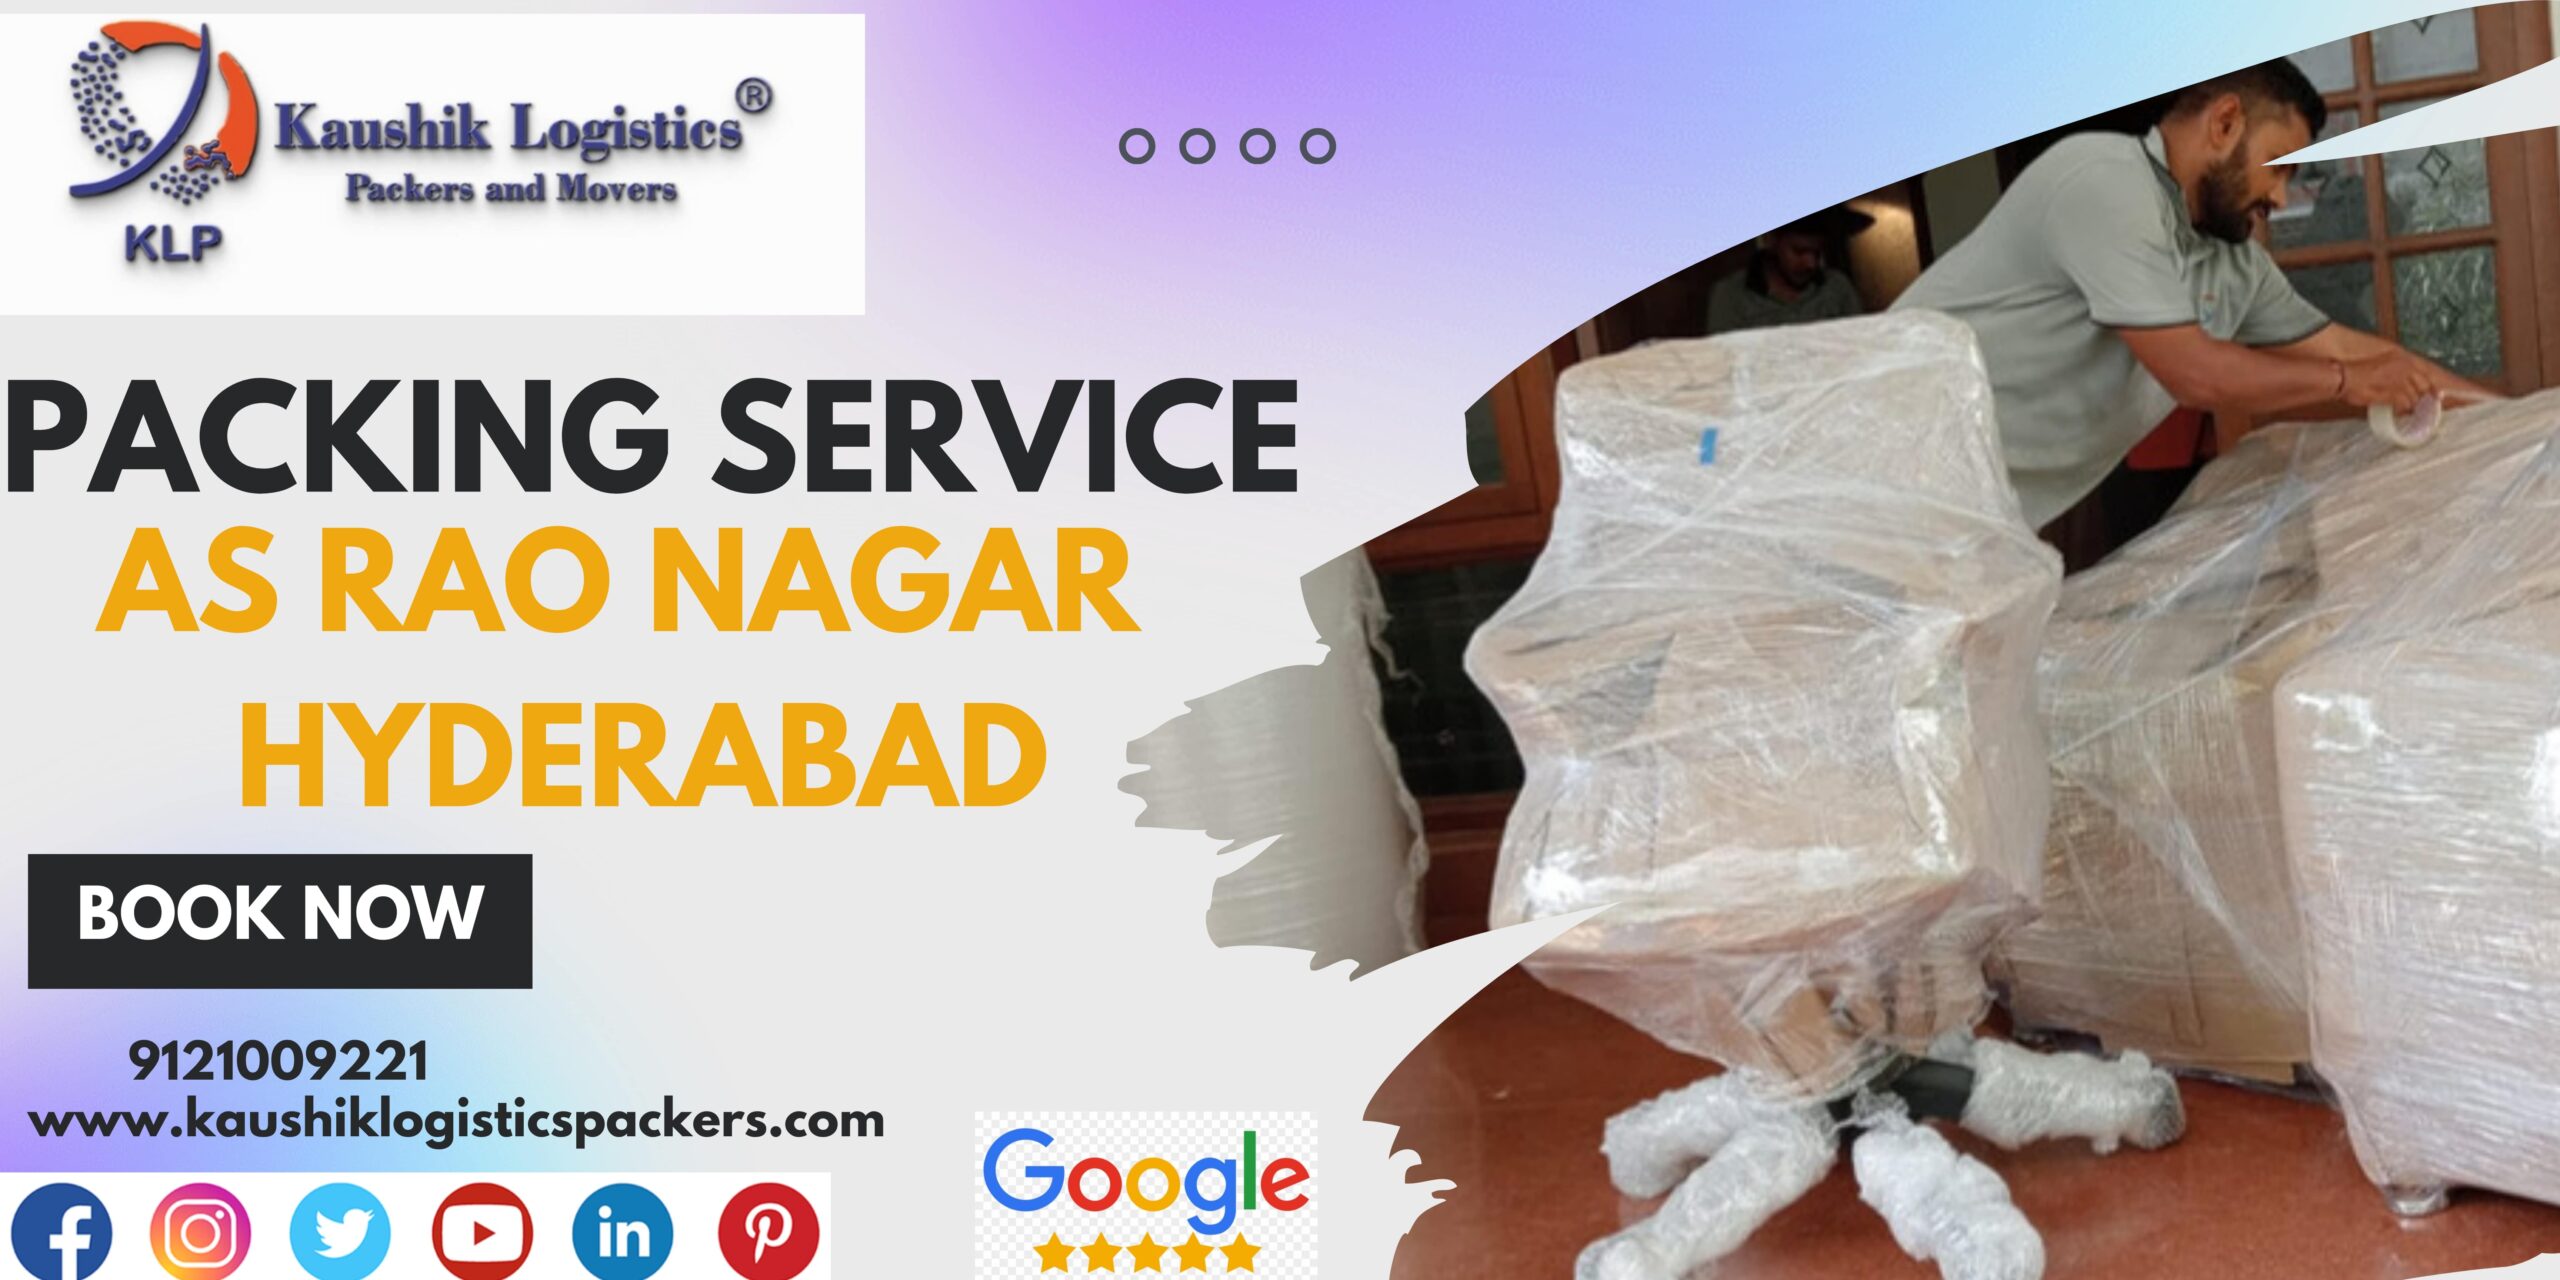 Packers and Movers In AS Rao Nagar